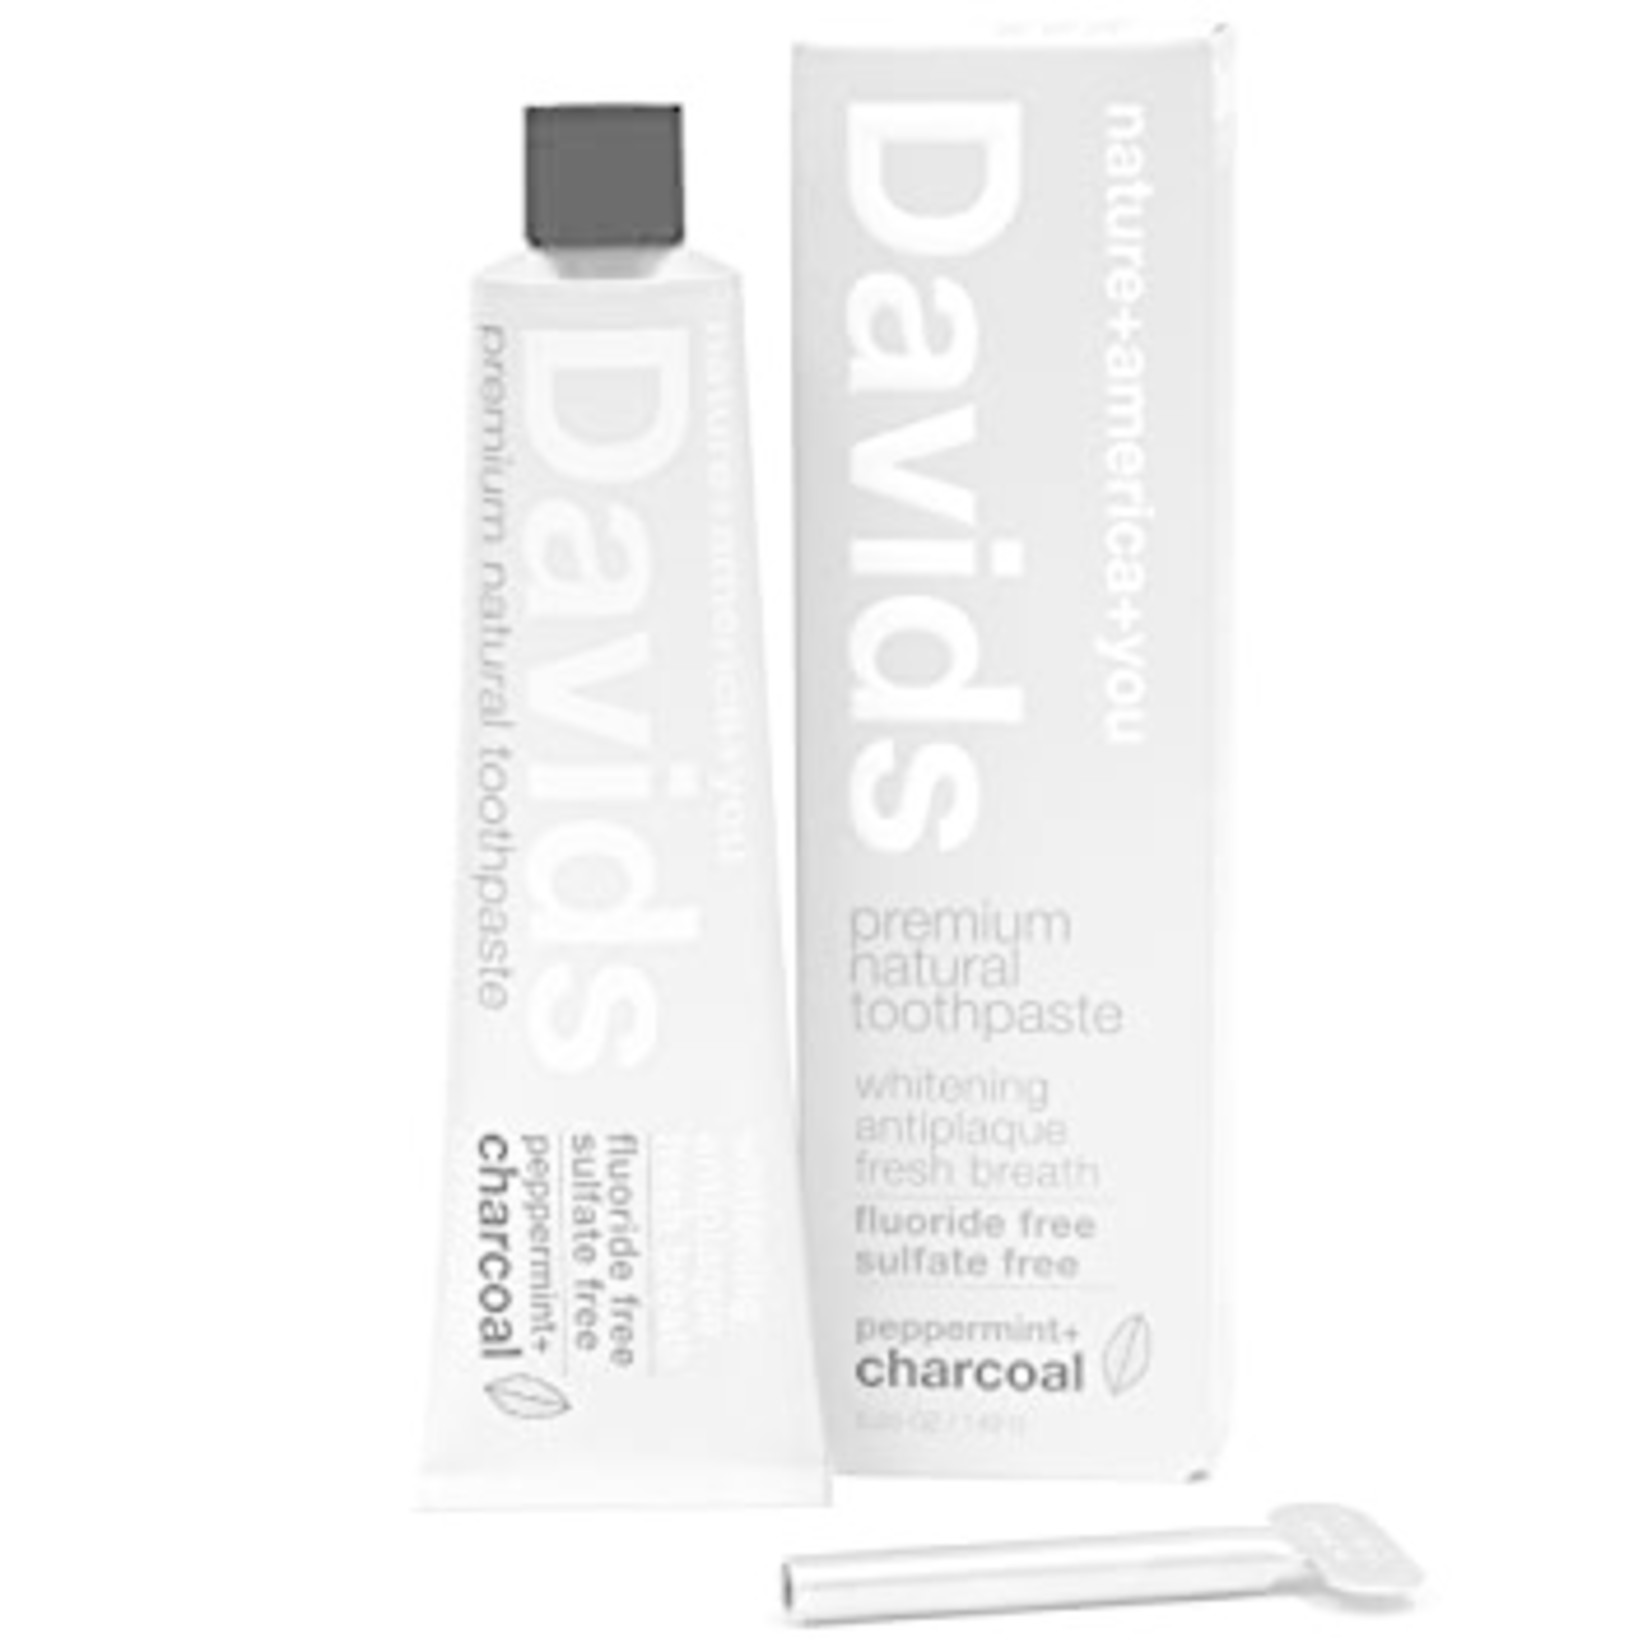 David's Toothpaste David's Natural Toothpaste + Charcoal